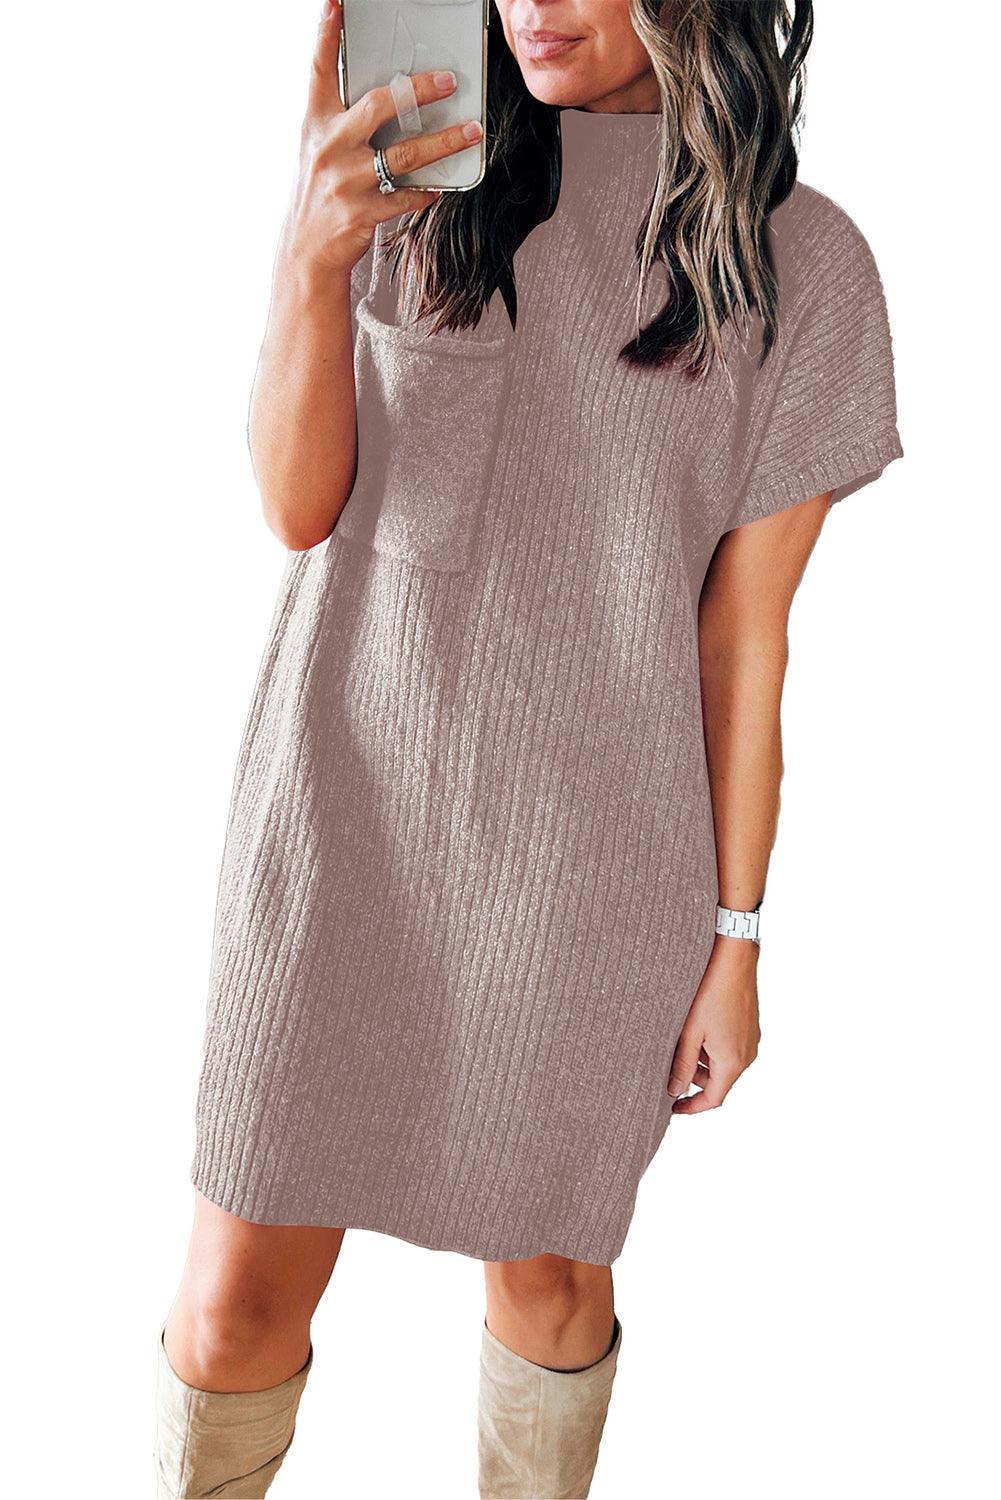 Simply Taupe Patch Pocket Ribbed Knit Short Sleeve Sweater Dress - L & M Kee, LLC